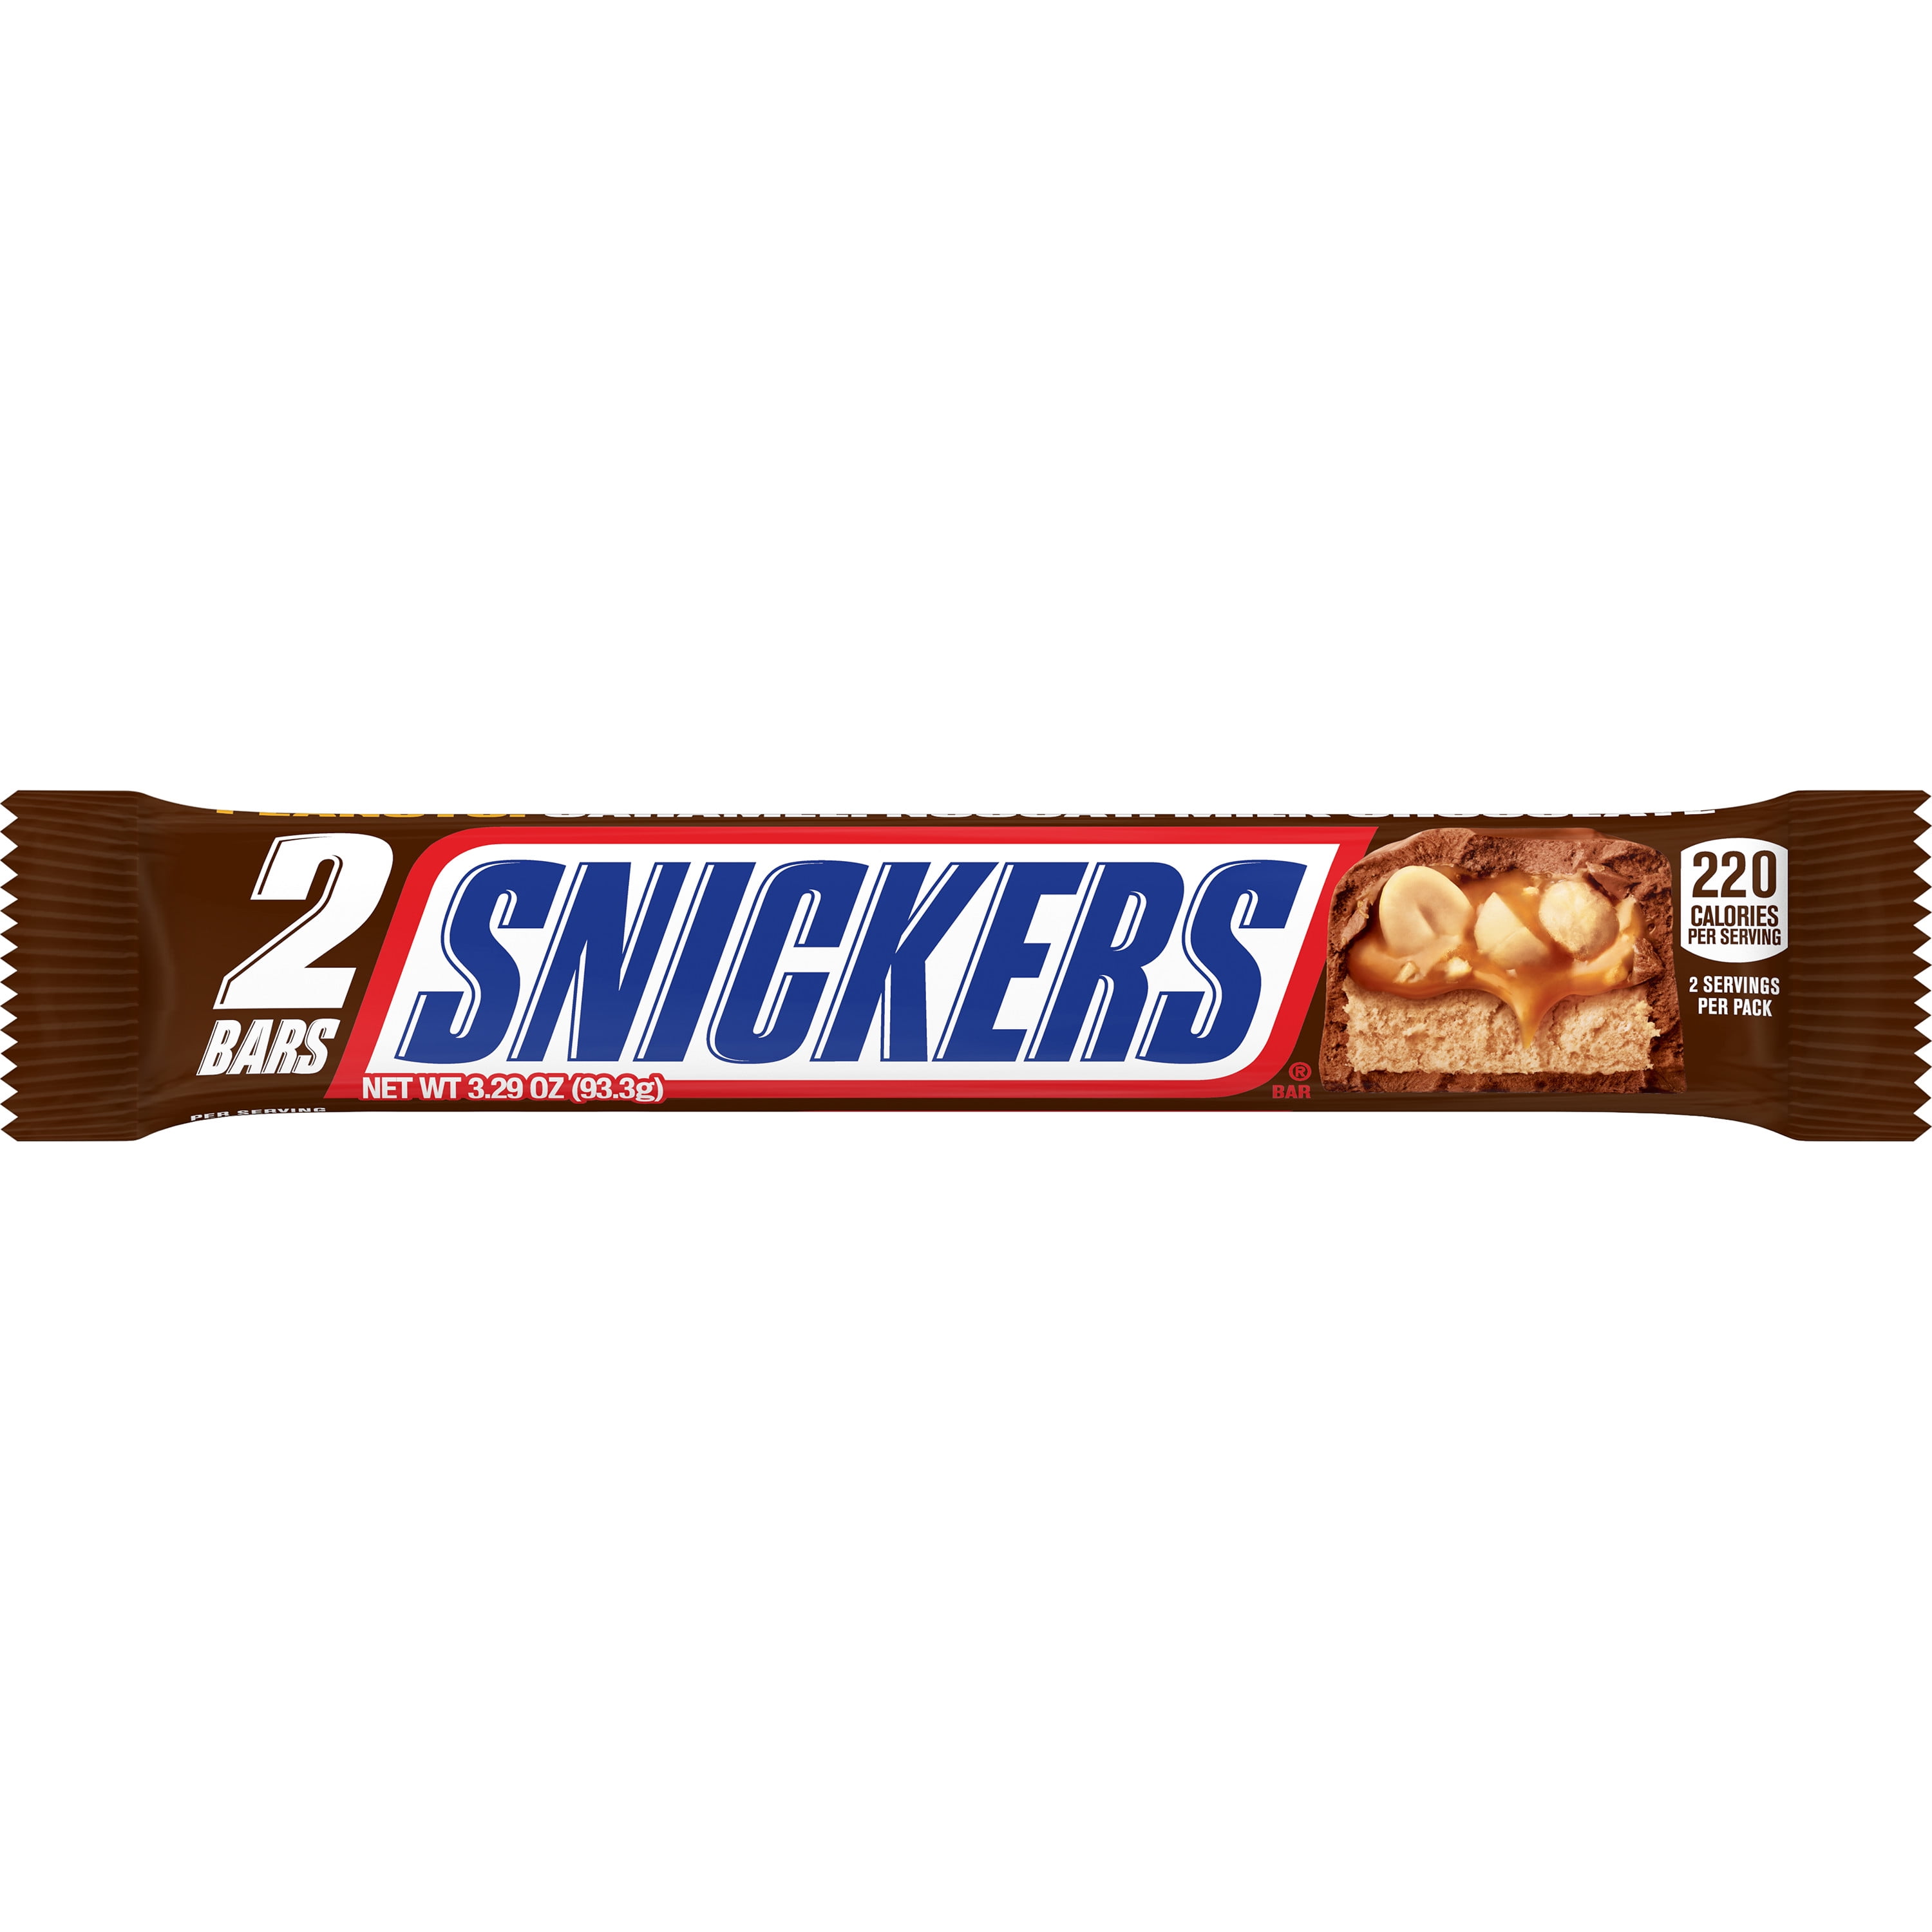 snickers black friday